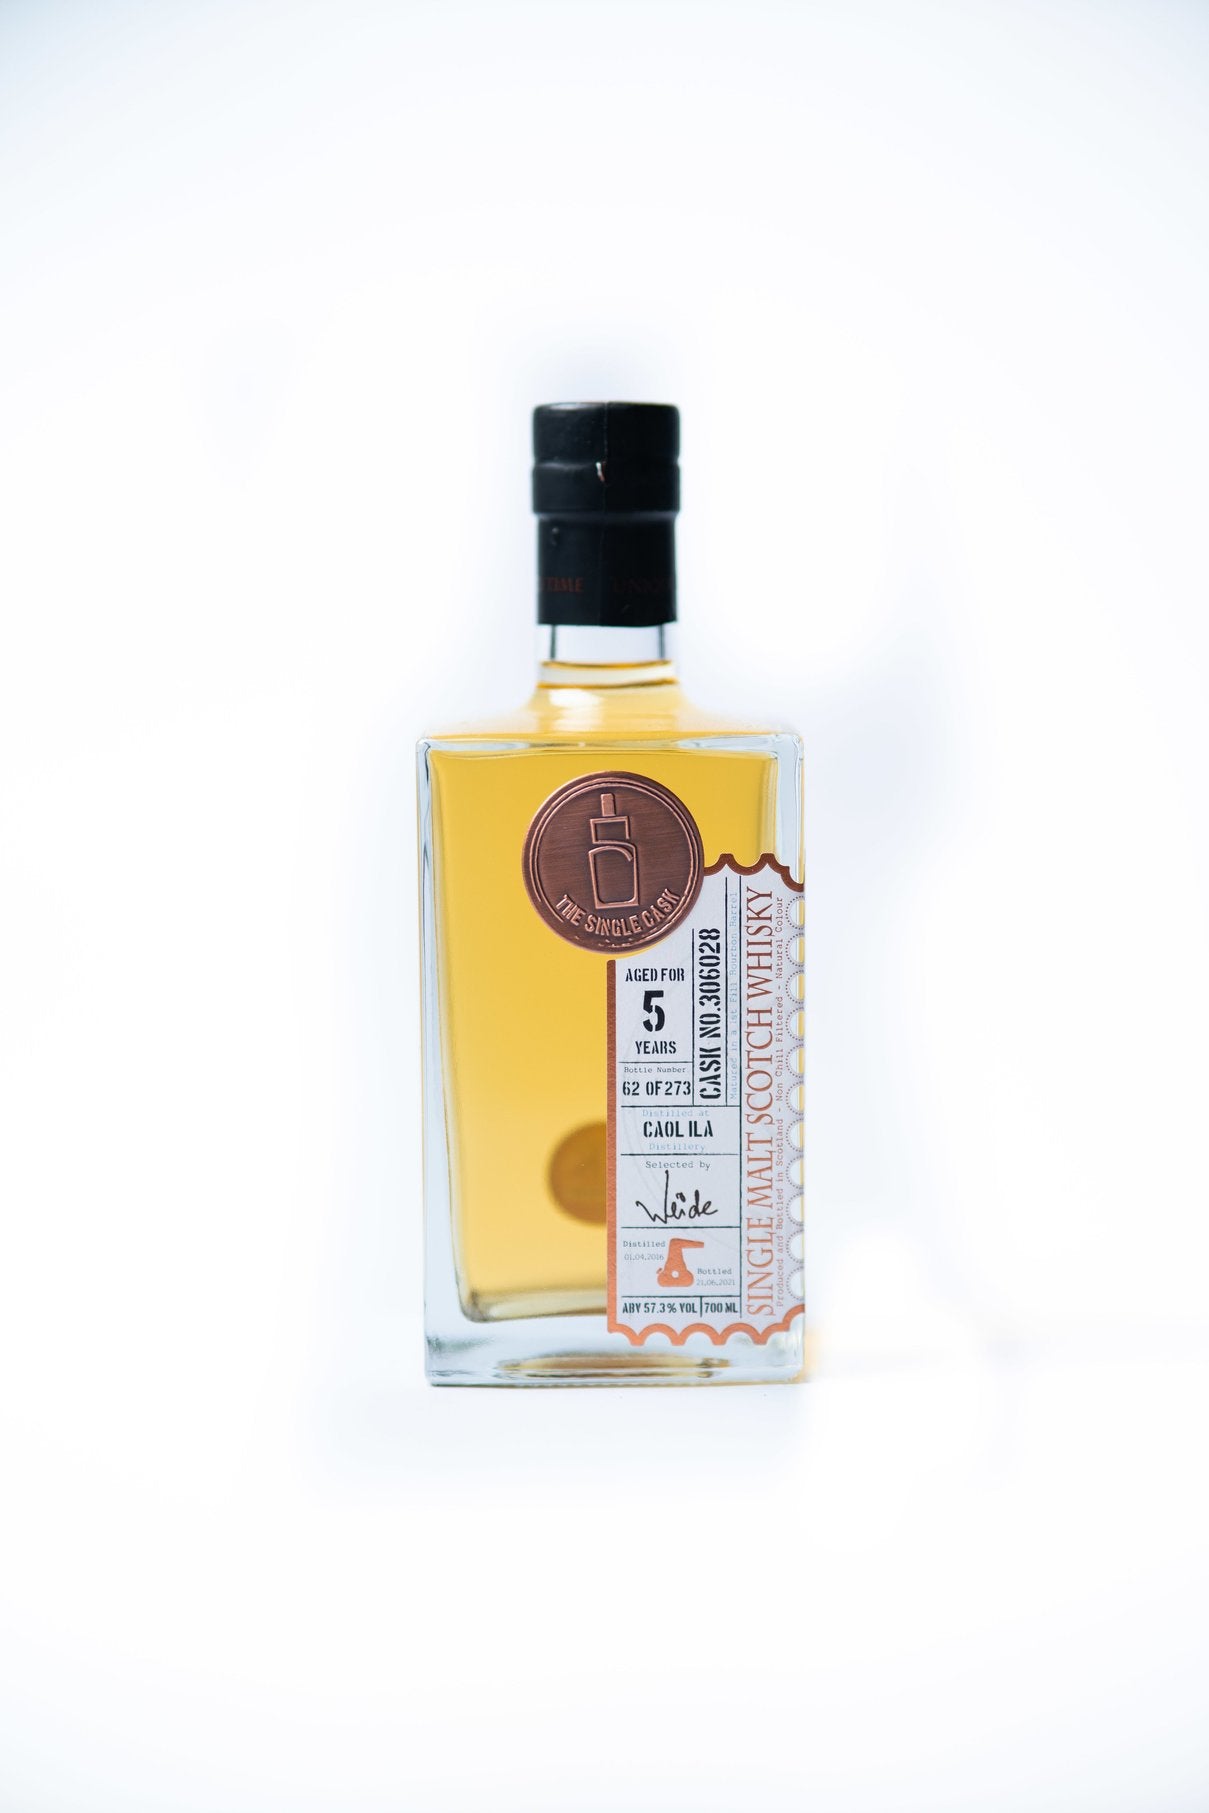 Caol Ila 5 year old scotch whisky by The Single Caskmatured in Bourbon Barrel